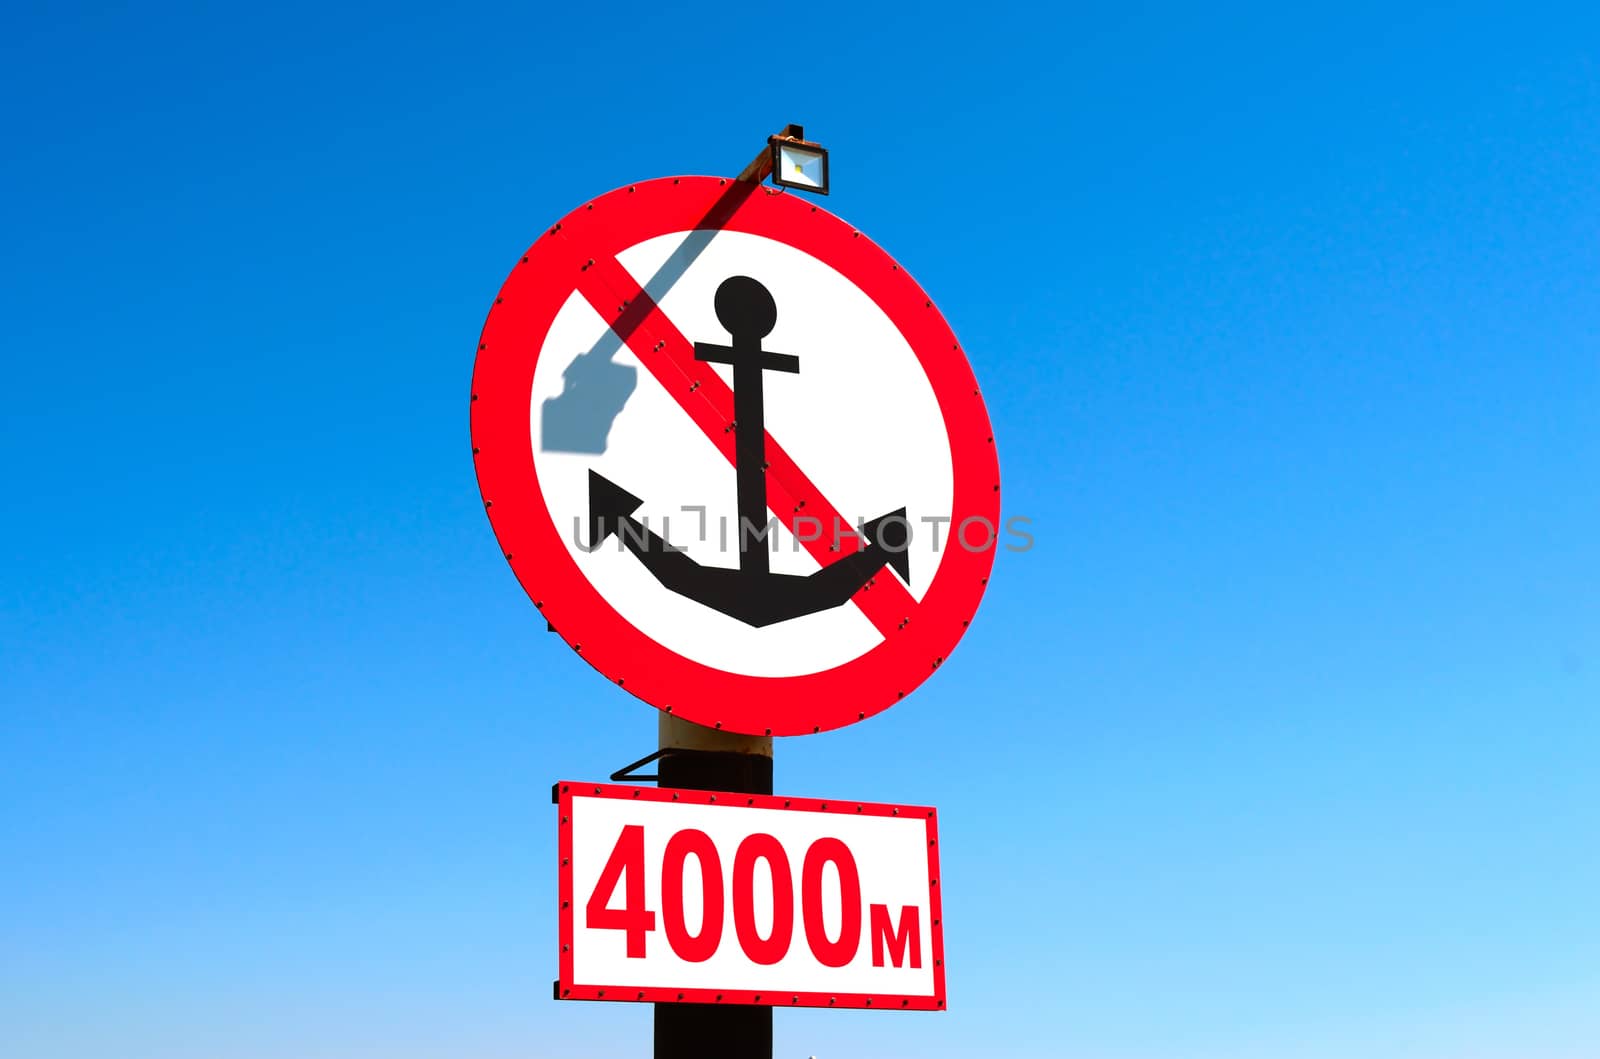 Prohibition sign for ships on the seashore